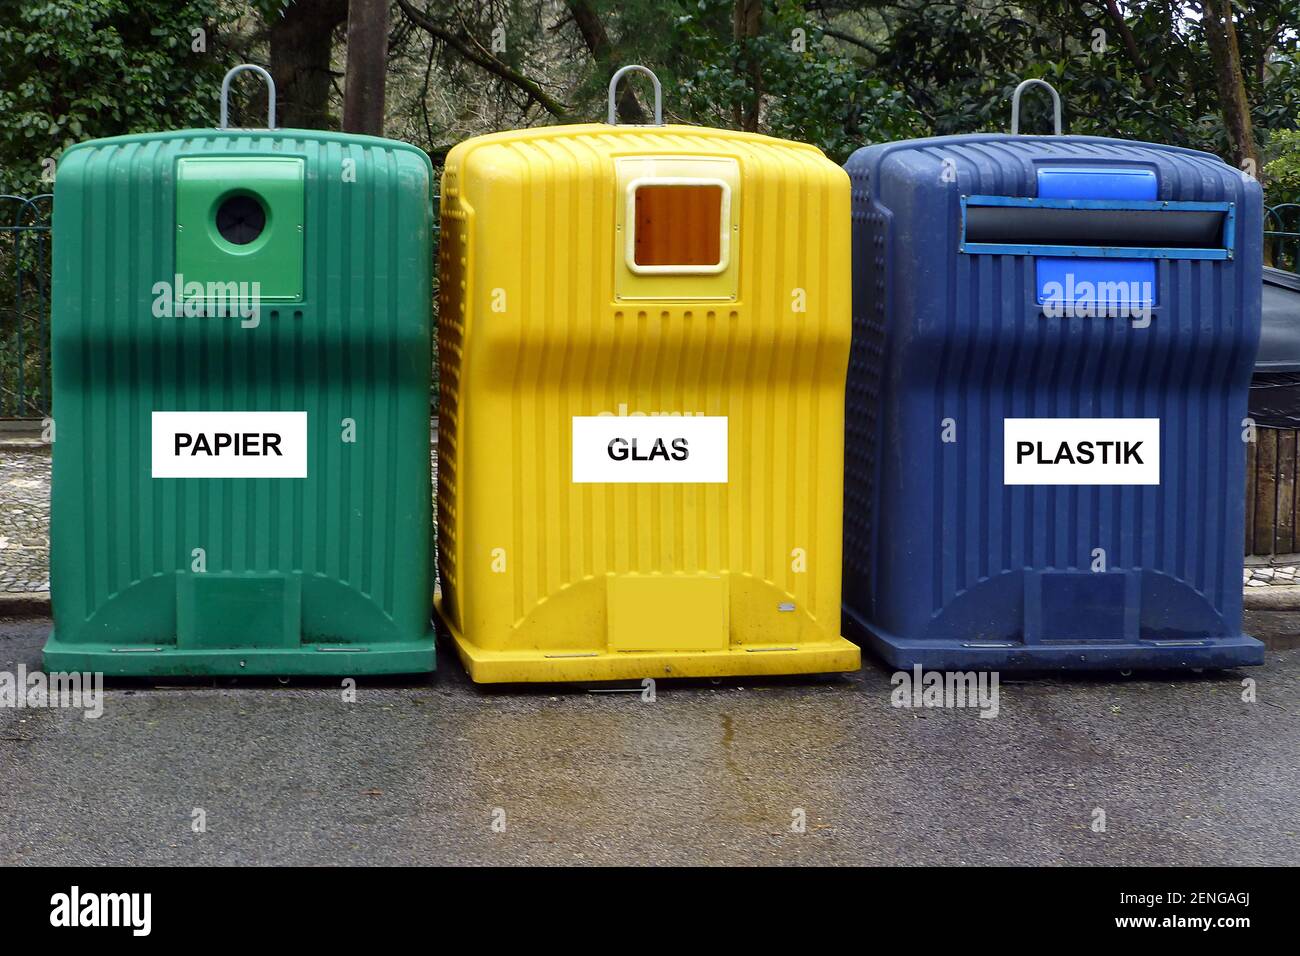 Abfall-Container, Abfallcontainer, Paier, Glas, Plastik, Wertstoffbehälter, Stock Photo